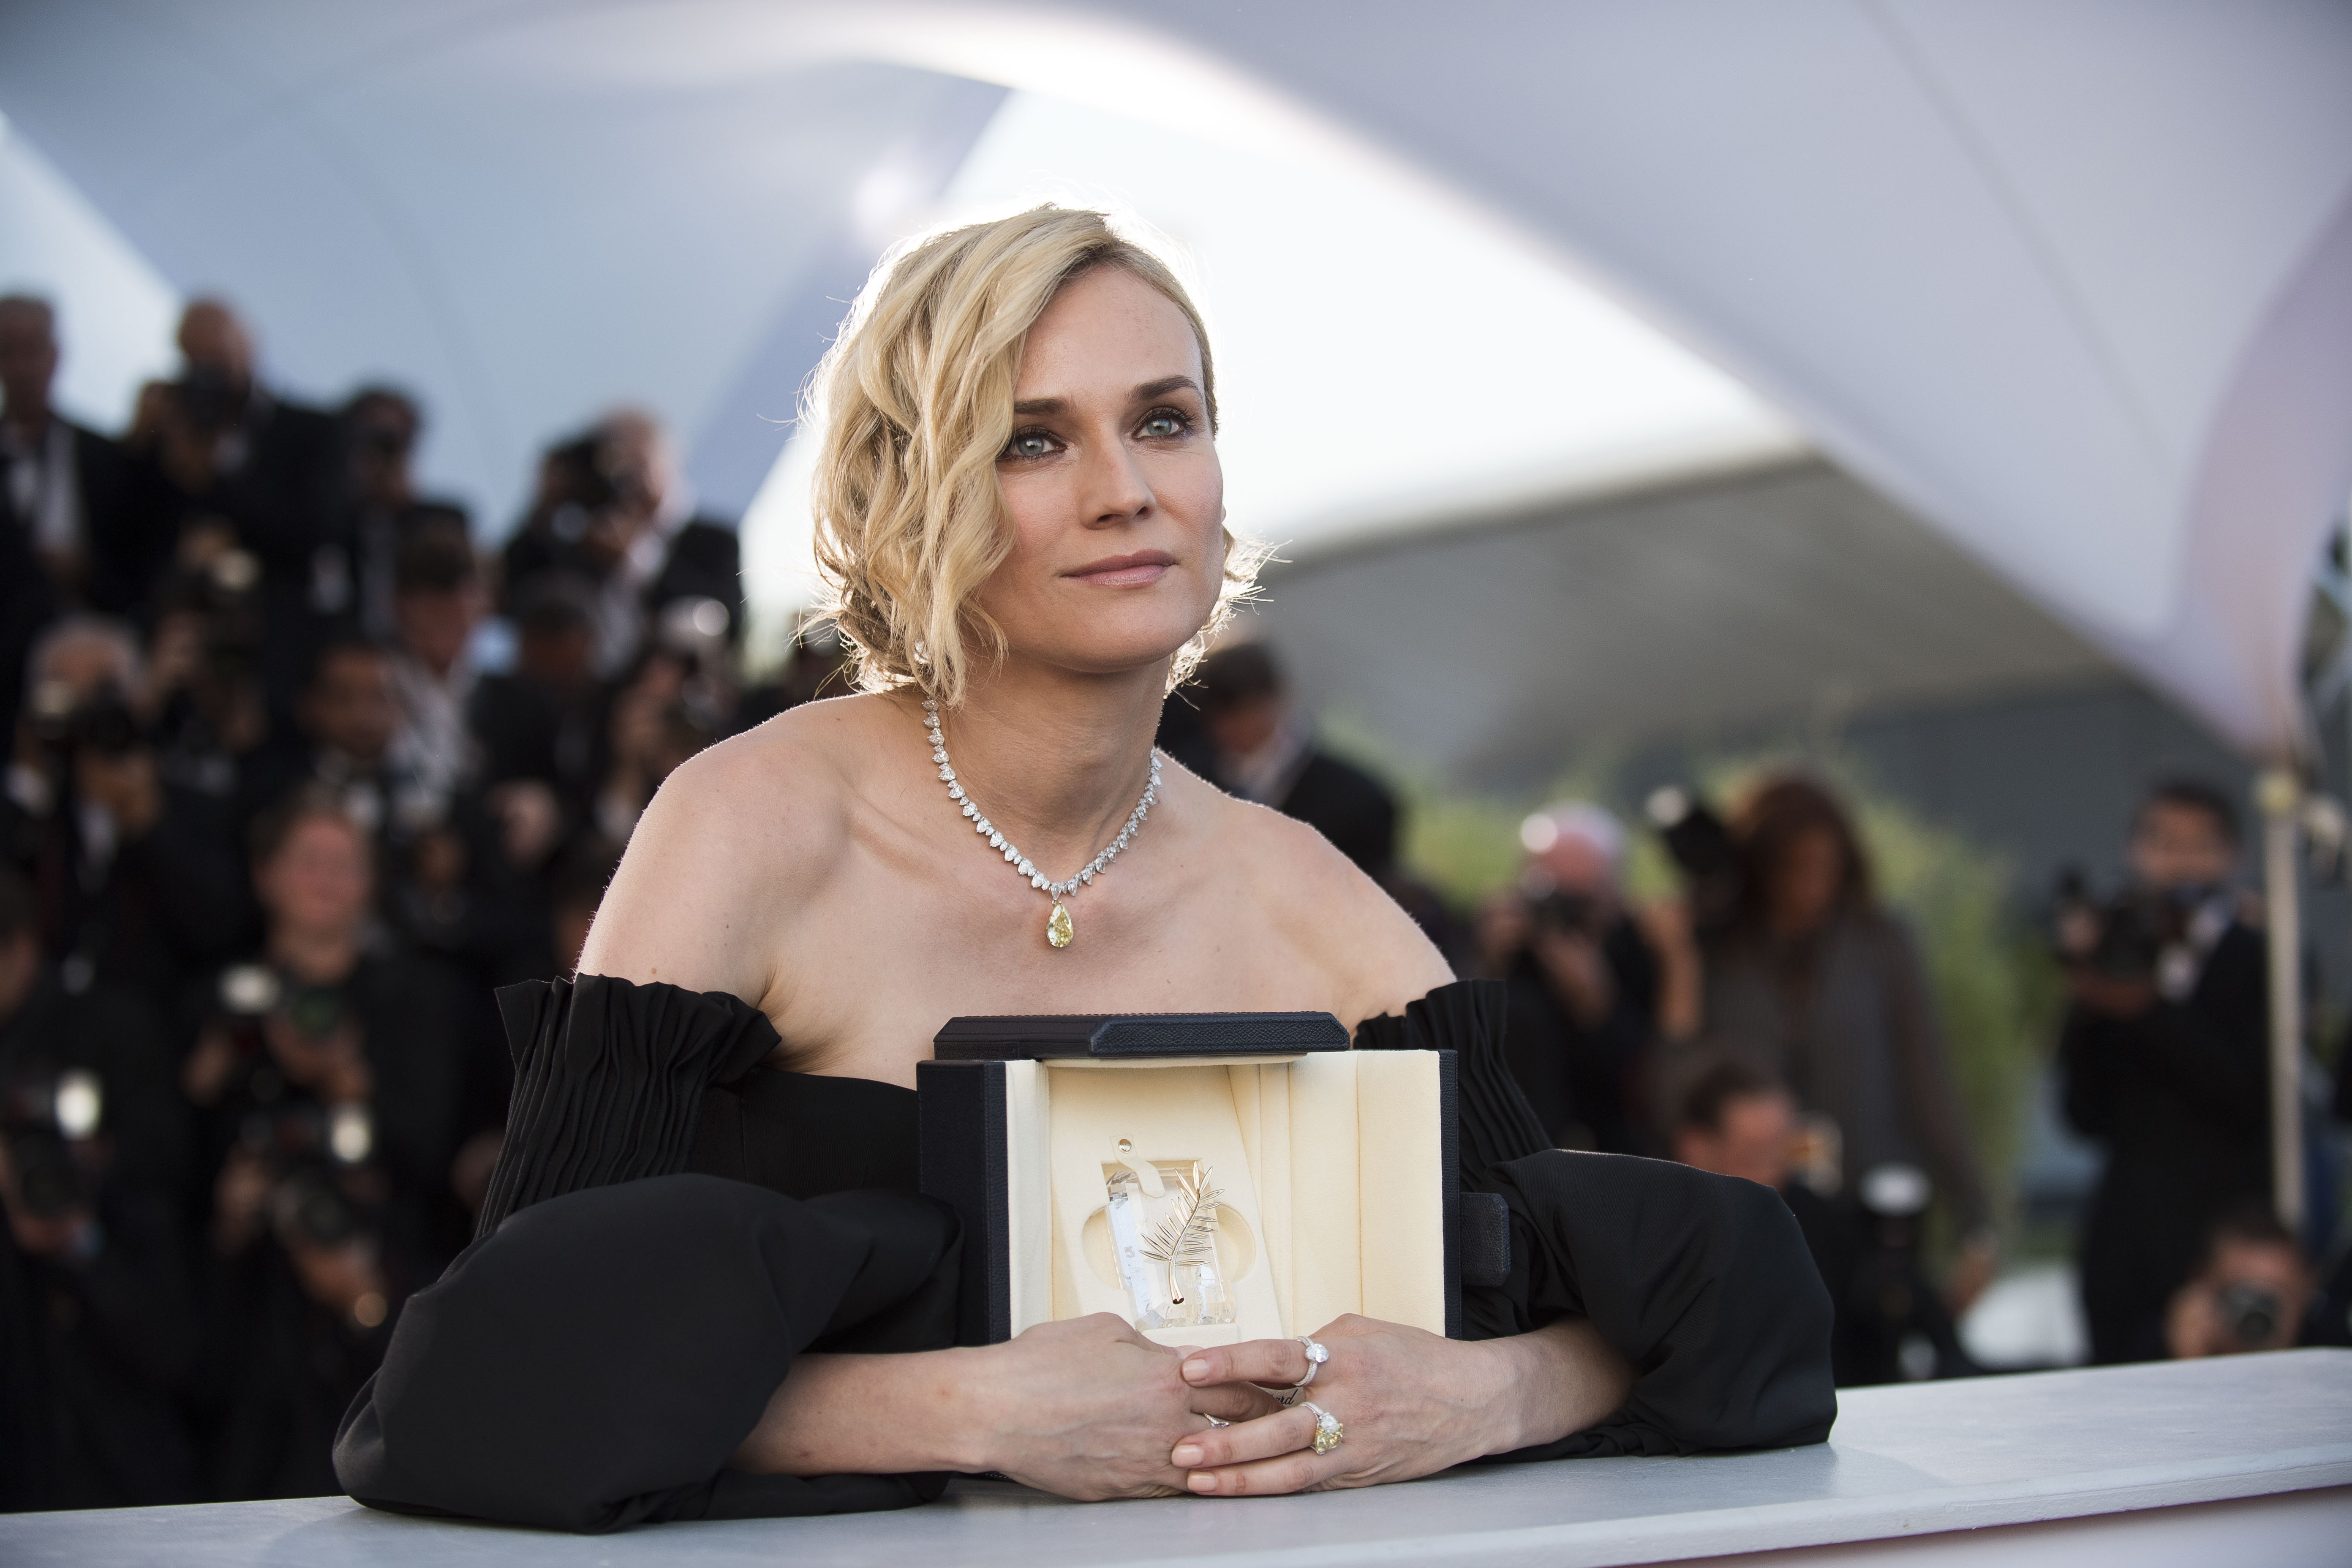 Actress Diane Kruger with her Best Actress award for her role in the film In The Fade poses for photographers during a photo call following the awards ceremony at the 70th international film festival, Cannes, southern France, Sunday, May 28, 2017. (Photo by Arthur Mola/Invision/AP)